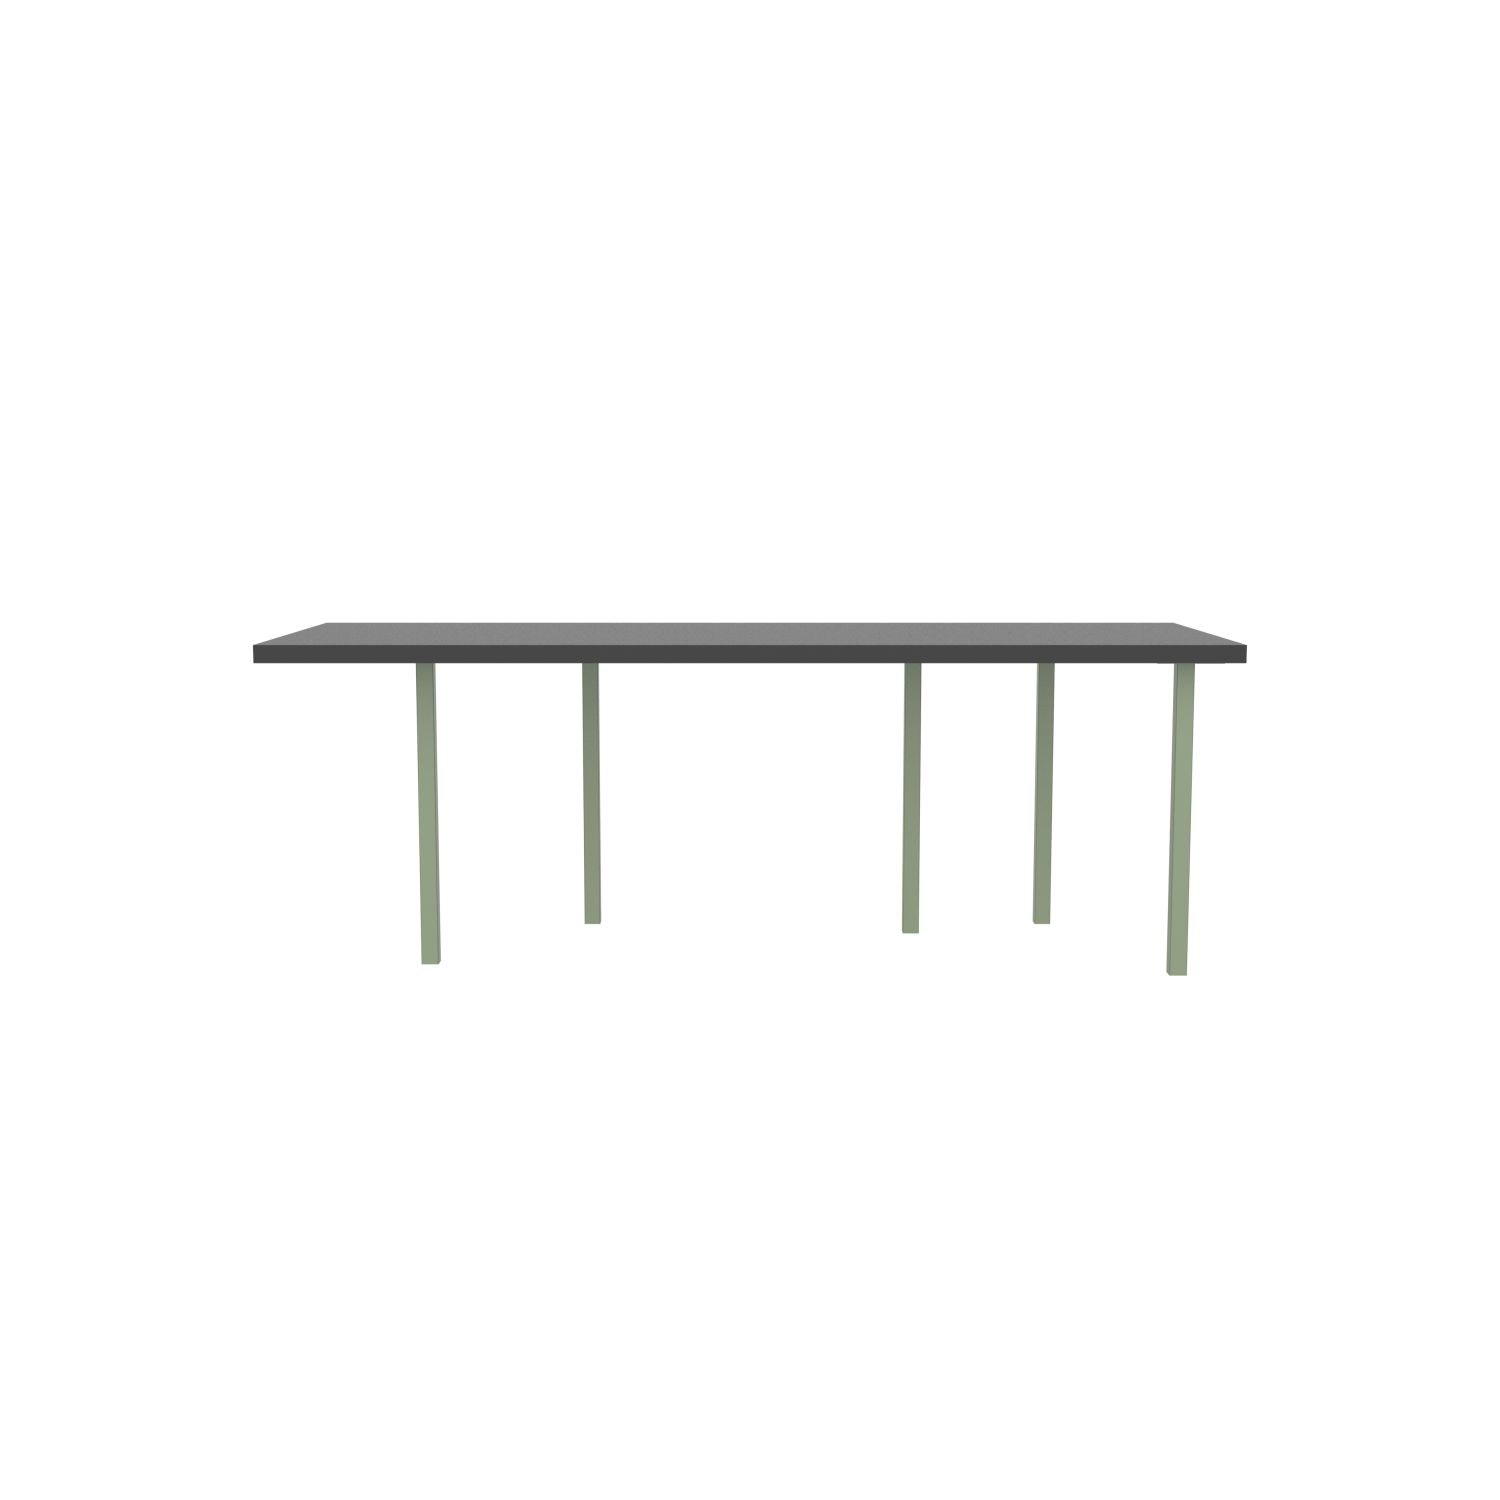 lensvelt bbrand table five fixed heigt 80x218 hpl black 50 mm price level 1 green ral6021